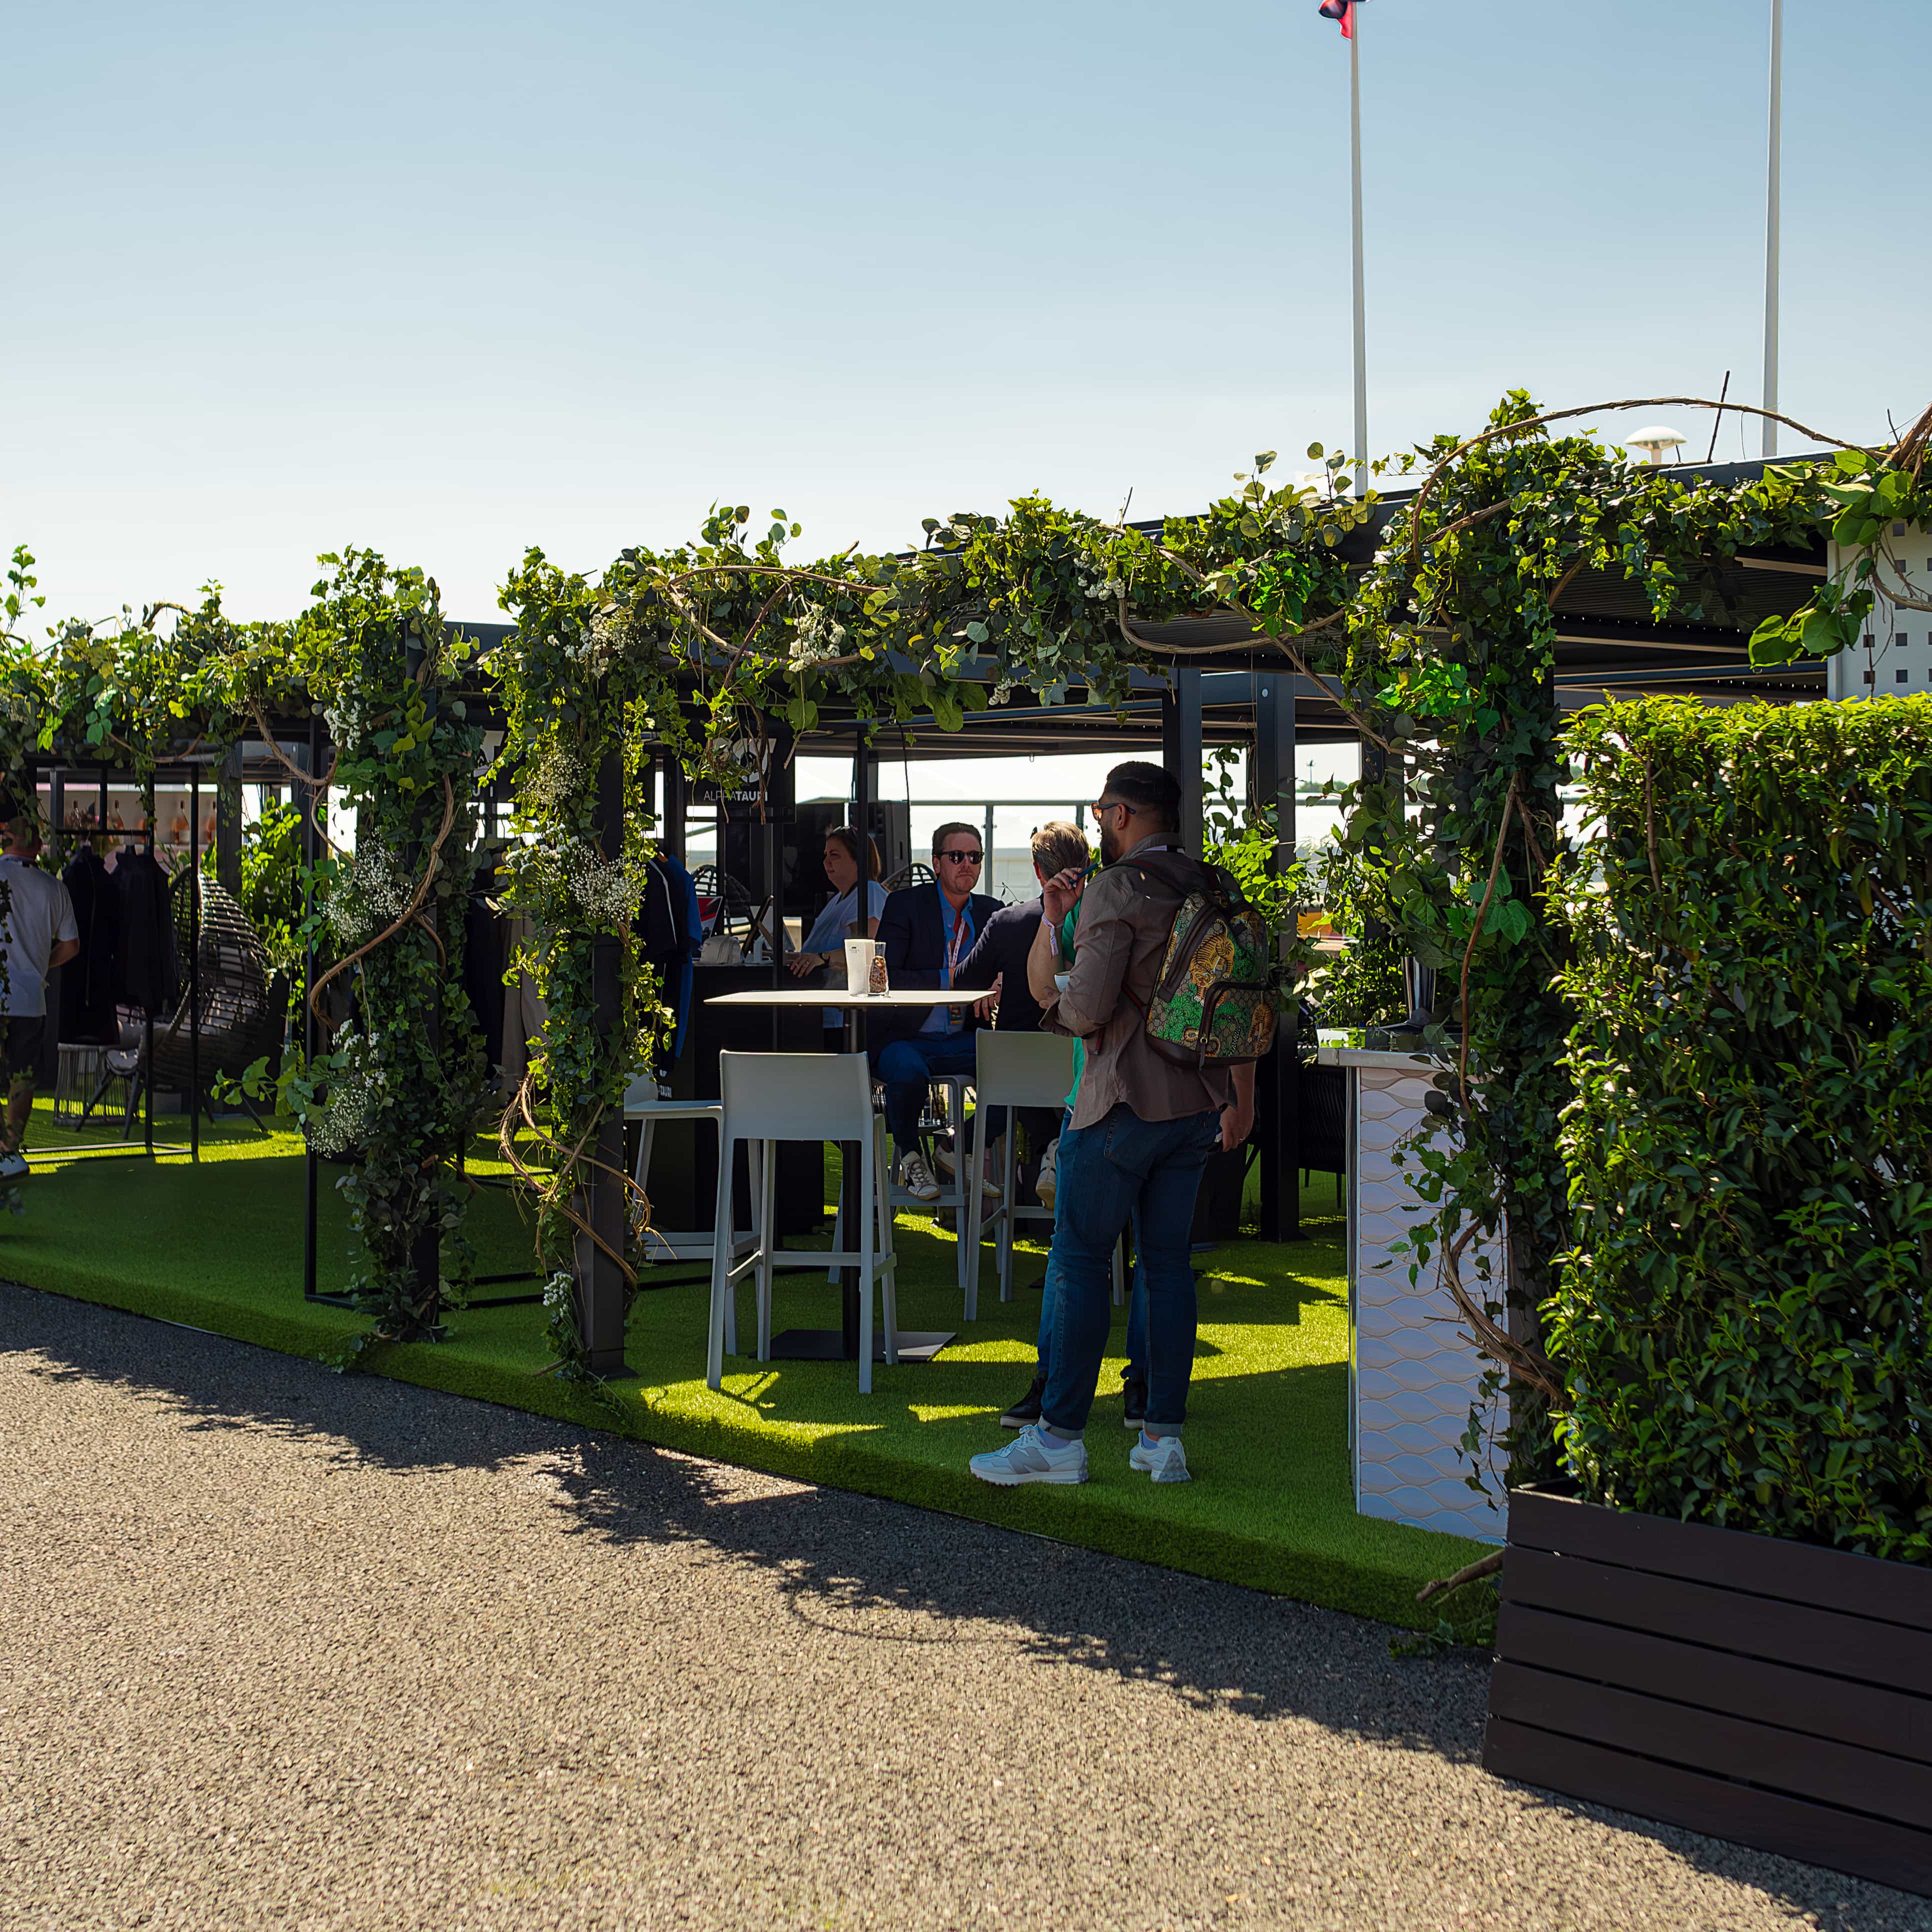 Captivating verdant archways gracing the Formula 1 Paddock, elevated by the nature-inspired decor crafted by event florist Amaranté.